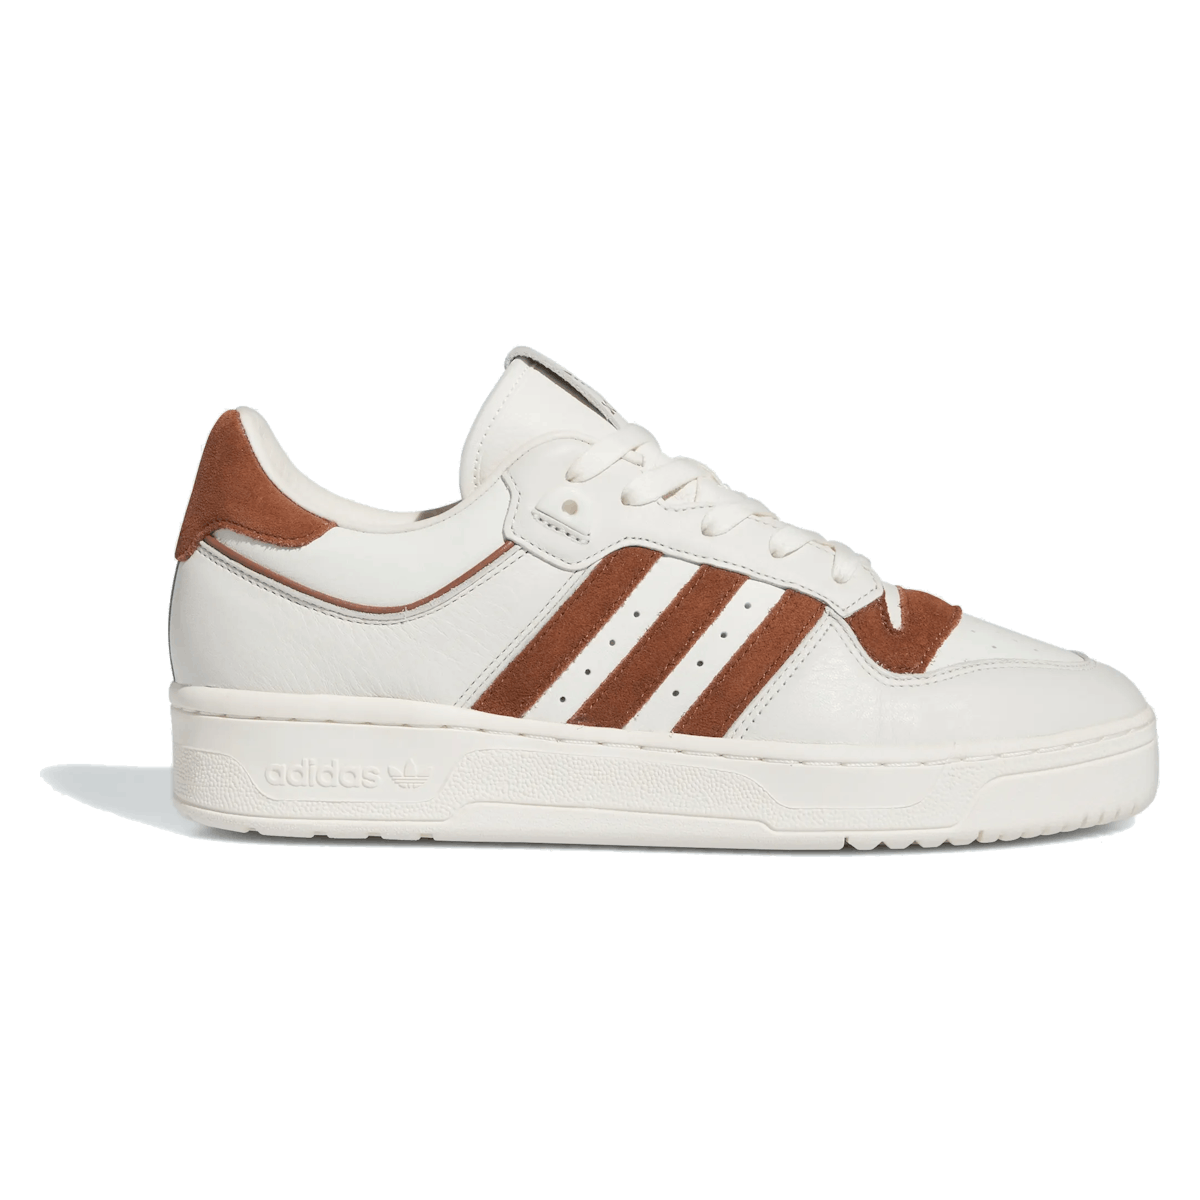 Adidas Rivalry 86 Low "Preloved Brown"